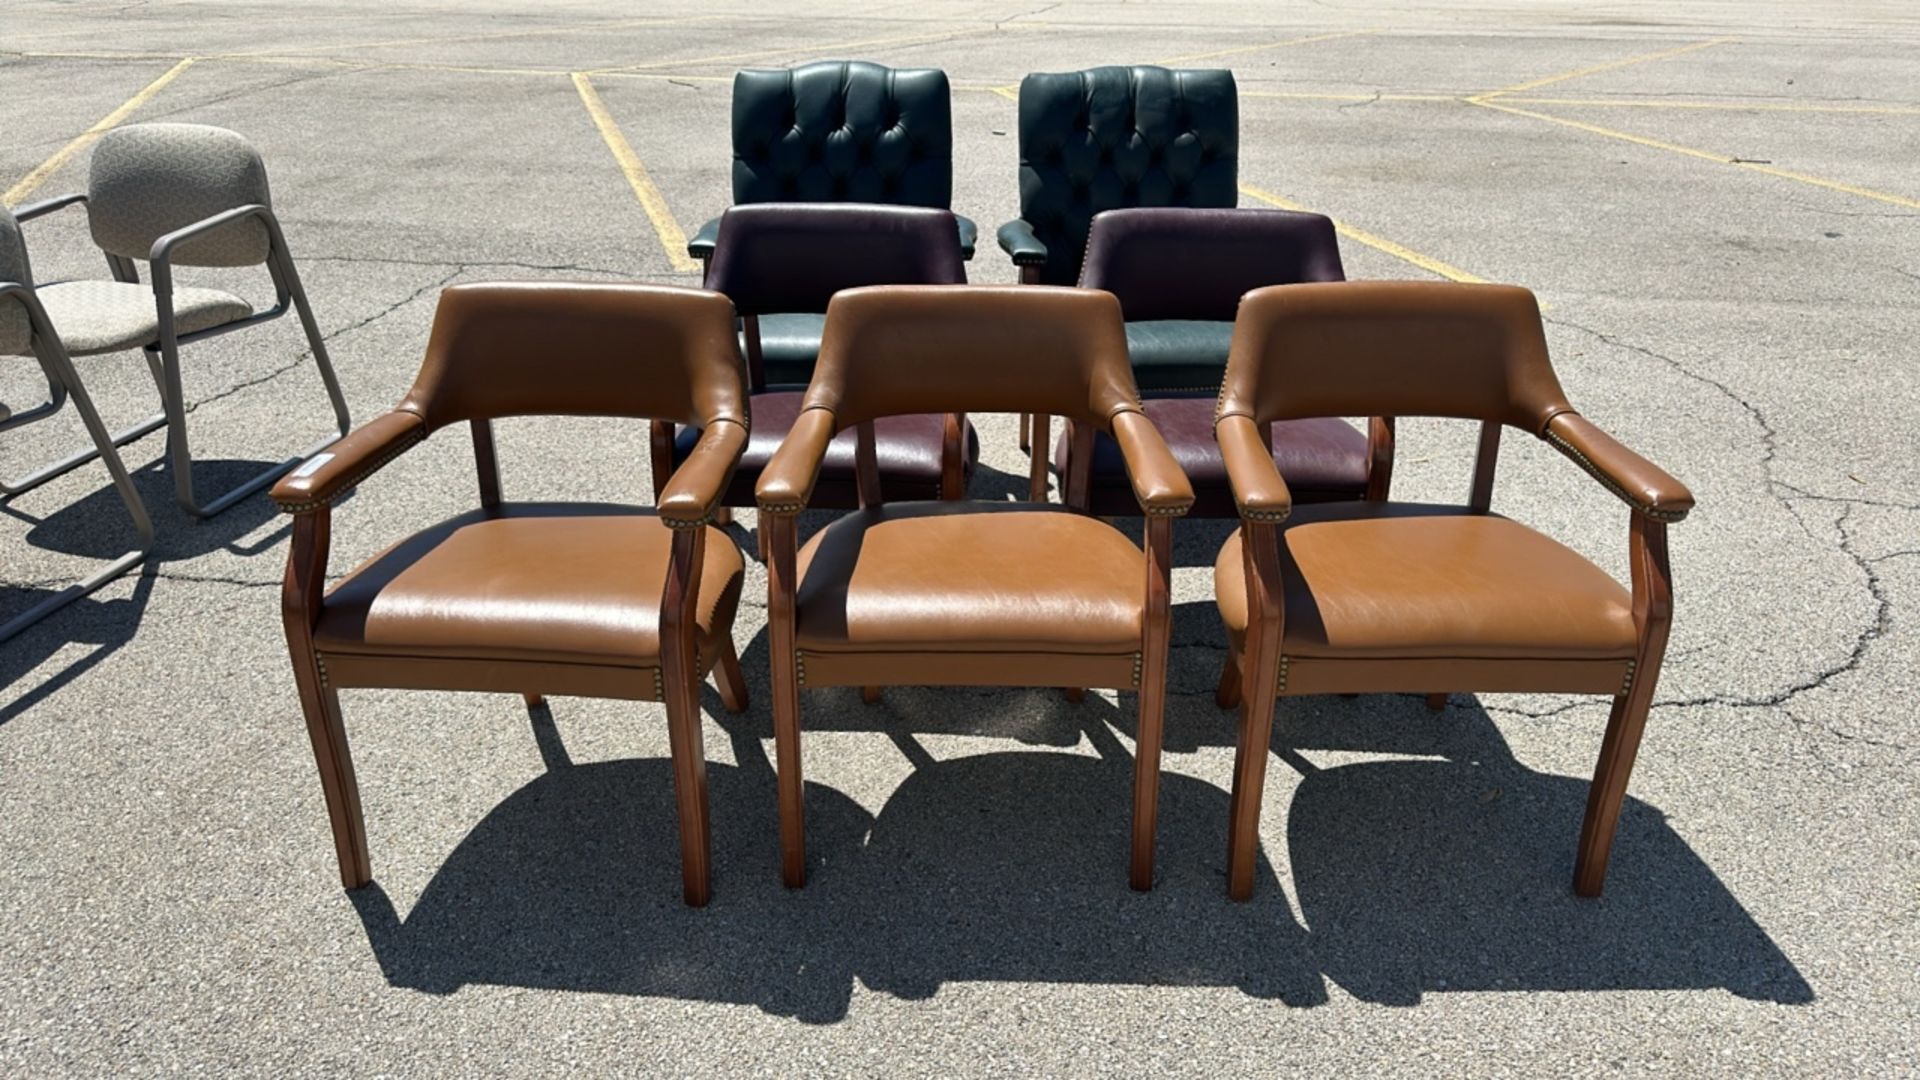 EXECUTIVE SIDE CHAIRS (QTY. 7)